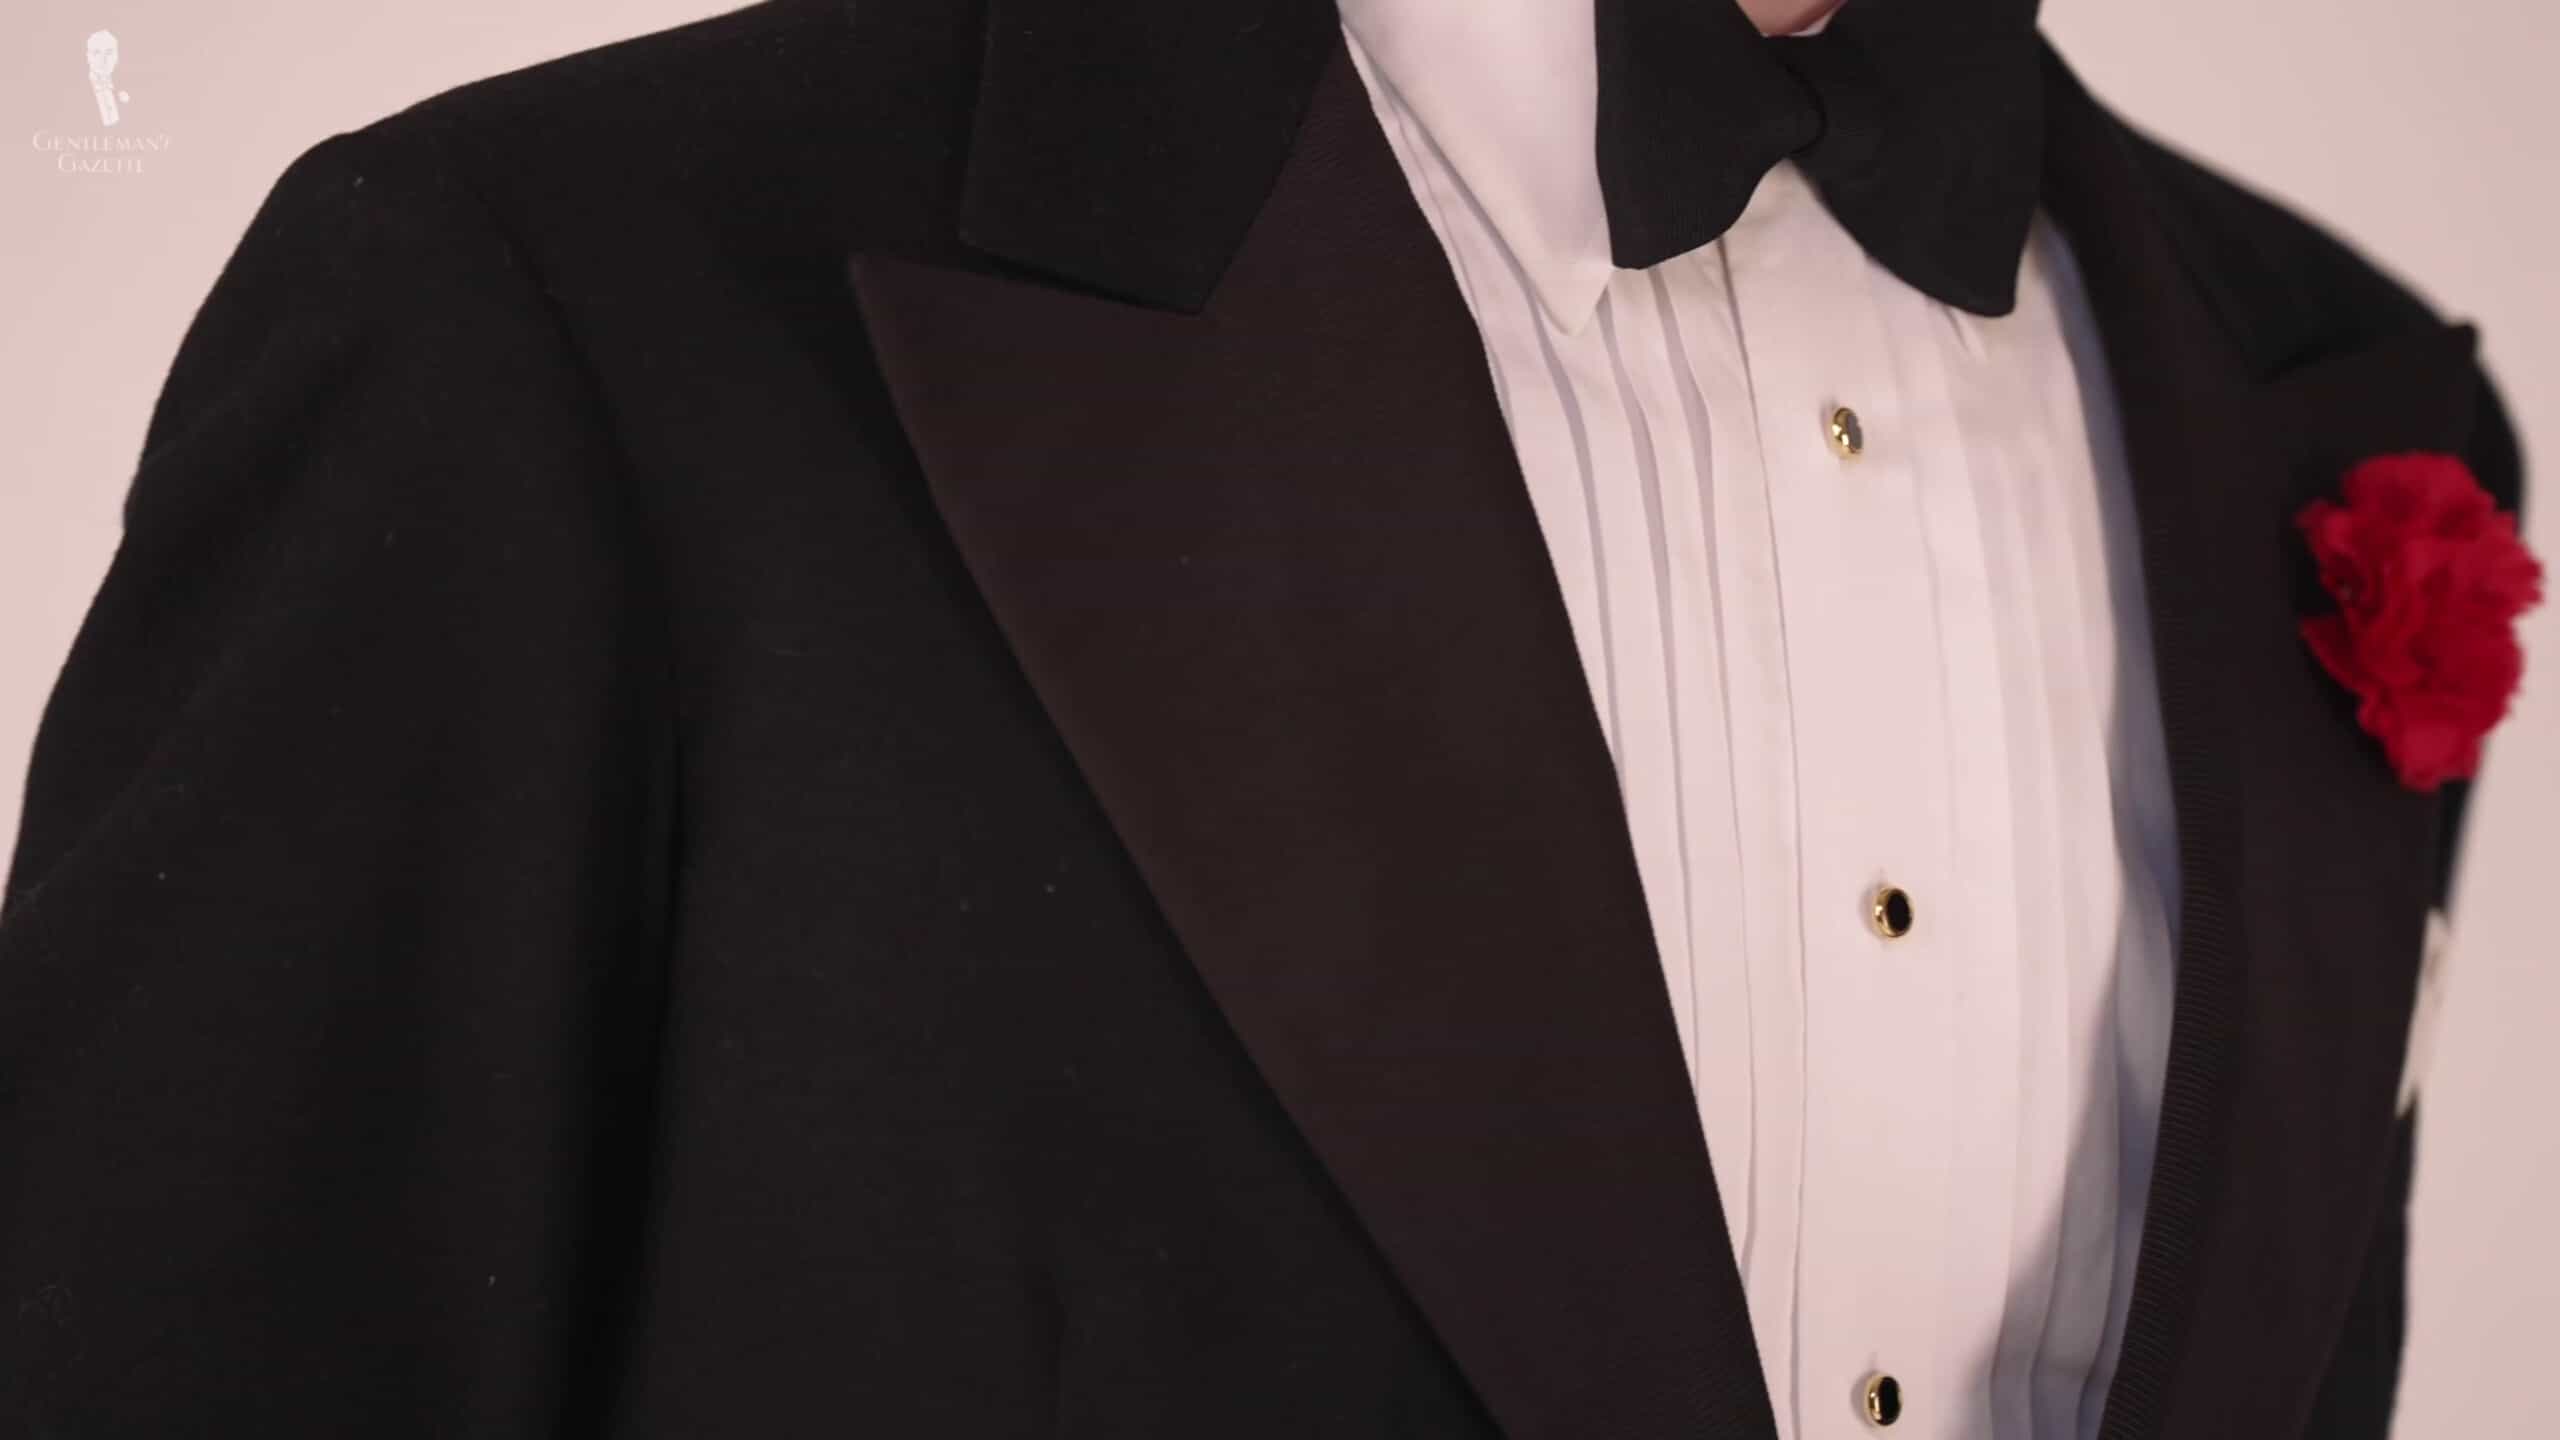 Tuxedos have a peaked lapel or a shawl collar usually with contrasting facings.